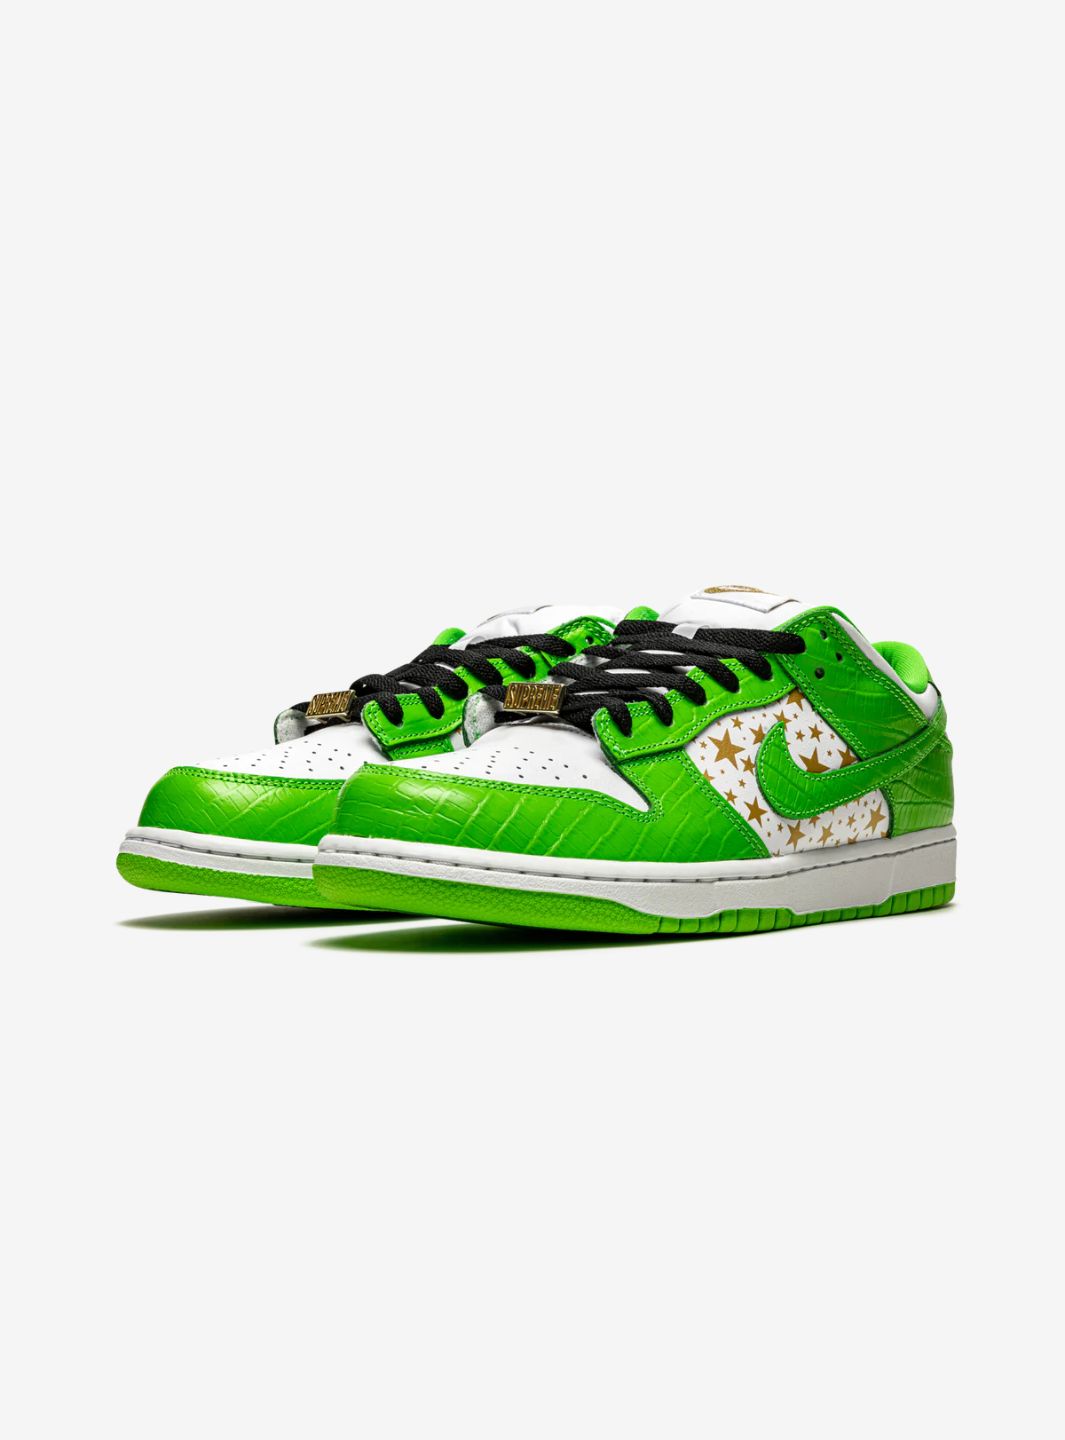 Nike SB Dunk Low Supreme Stars Mean Green (2021) - DH3228-101 | ResellZone